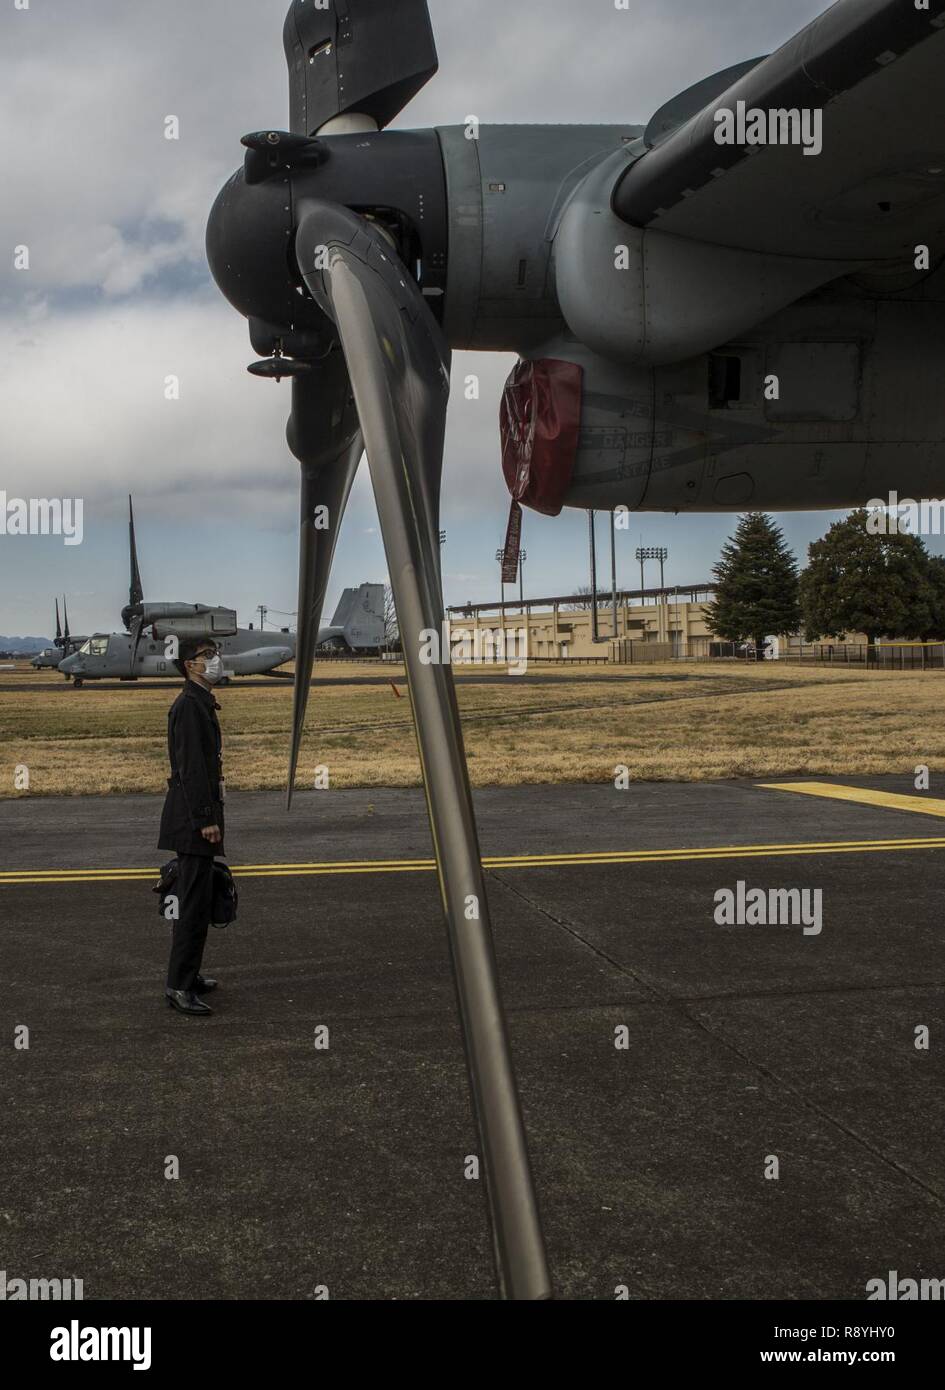 Deputy Director Kazuya Otsuki, part of the joint staff for the Japan Ministry of Defense, examines the blade of an MV-22B Osprey tiltrotor aircraft during a static display of the Osprey on Yokota Air Base, Japan, March 16, 2017 as part of Forest Light 17-1. Forest Light is a routine, semi-annual exercise conducted by U.S. and Japanese forces in order to strengthen our interoperability and combined capabilities in defense of the U.S.-Japanese alliance. Stock Photo